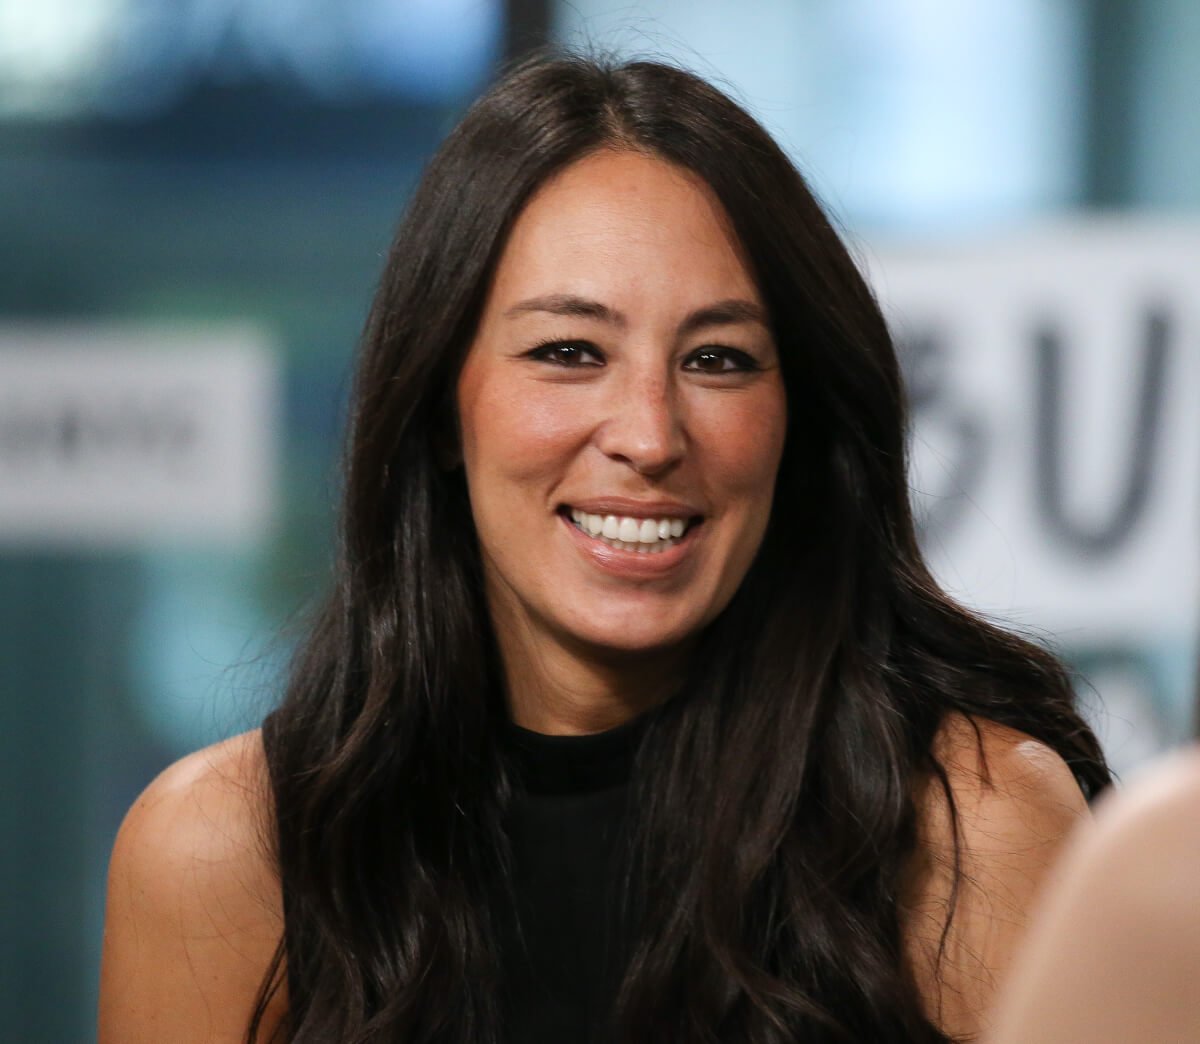 Fixer Upper star Joanna Gaines smiles and wears a black top.